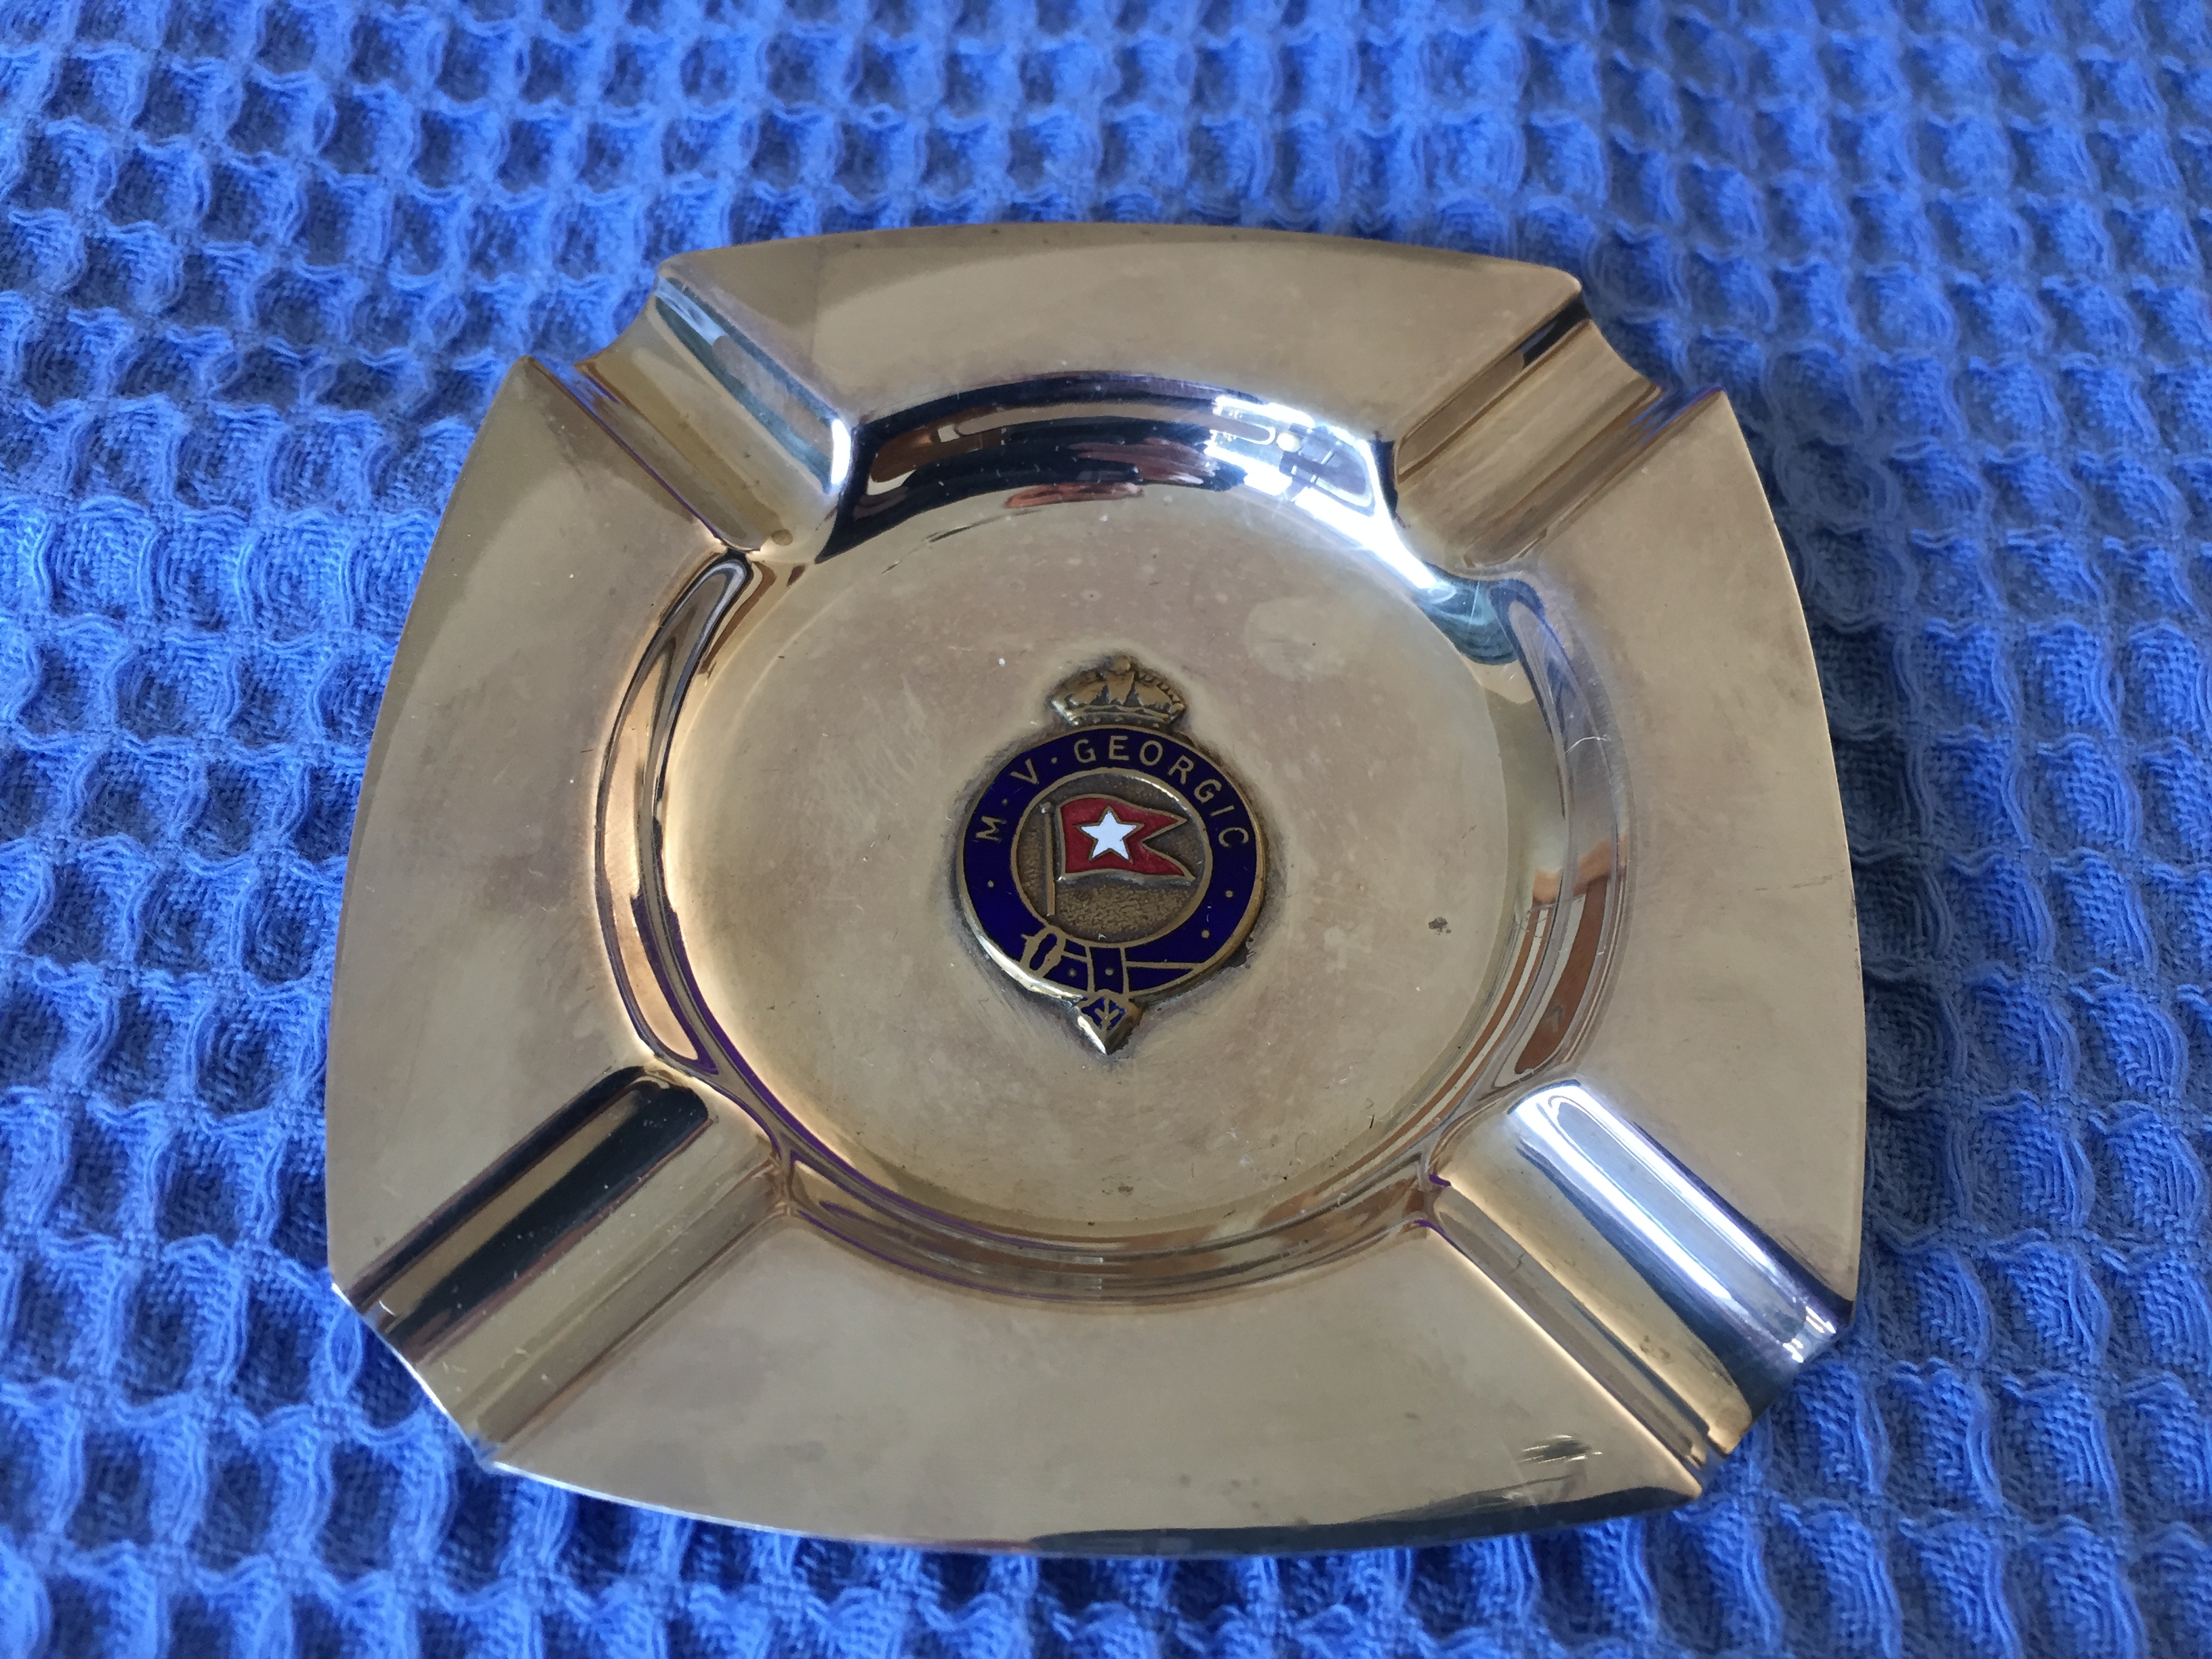 VERY RARE TO FIND SILVER PLATED ASHTRAY FROM THE WHITE STAR LINE VESSEL THE MV GEORGIC